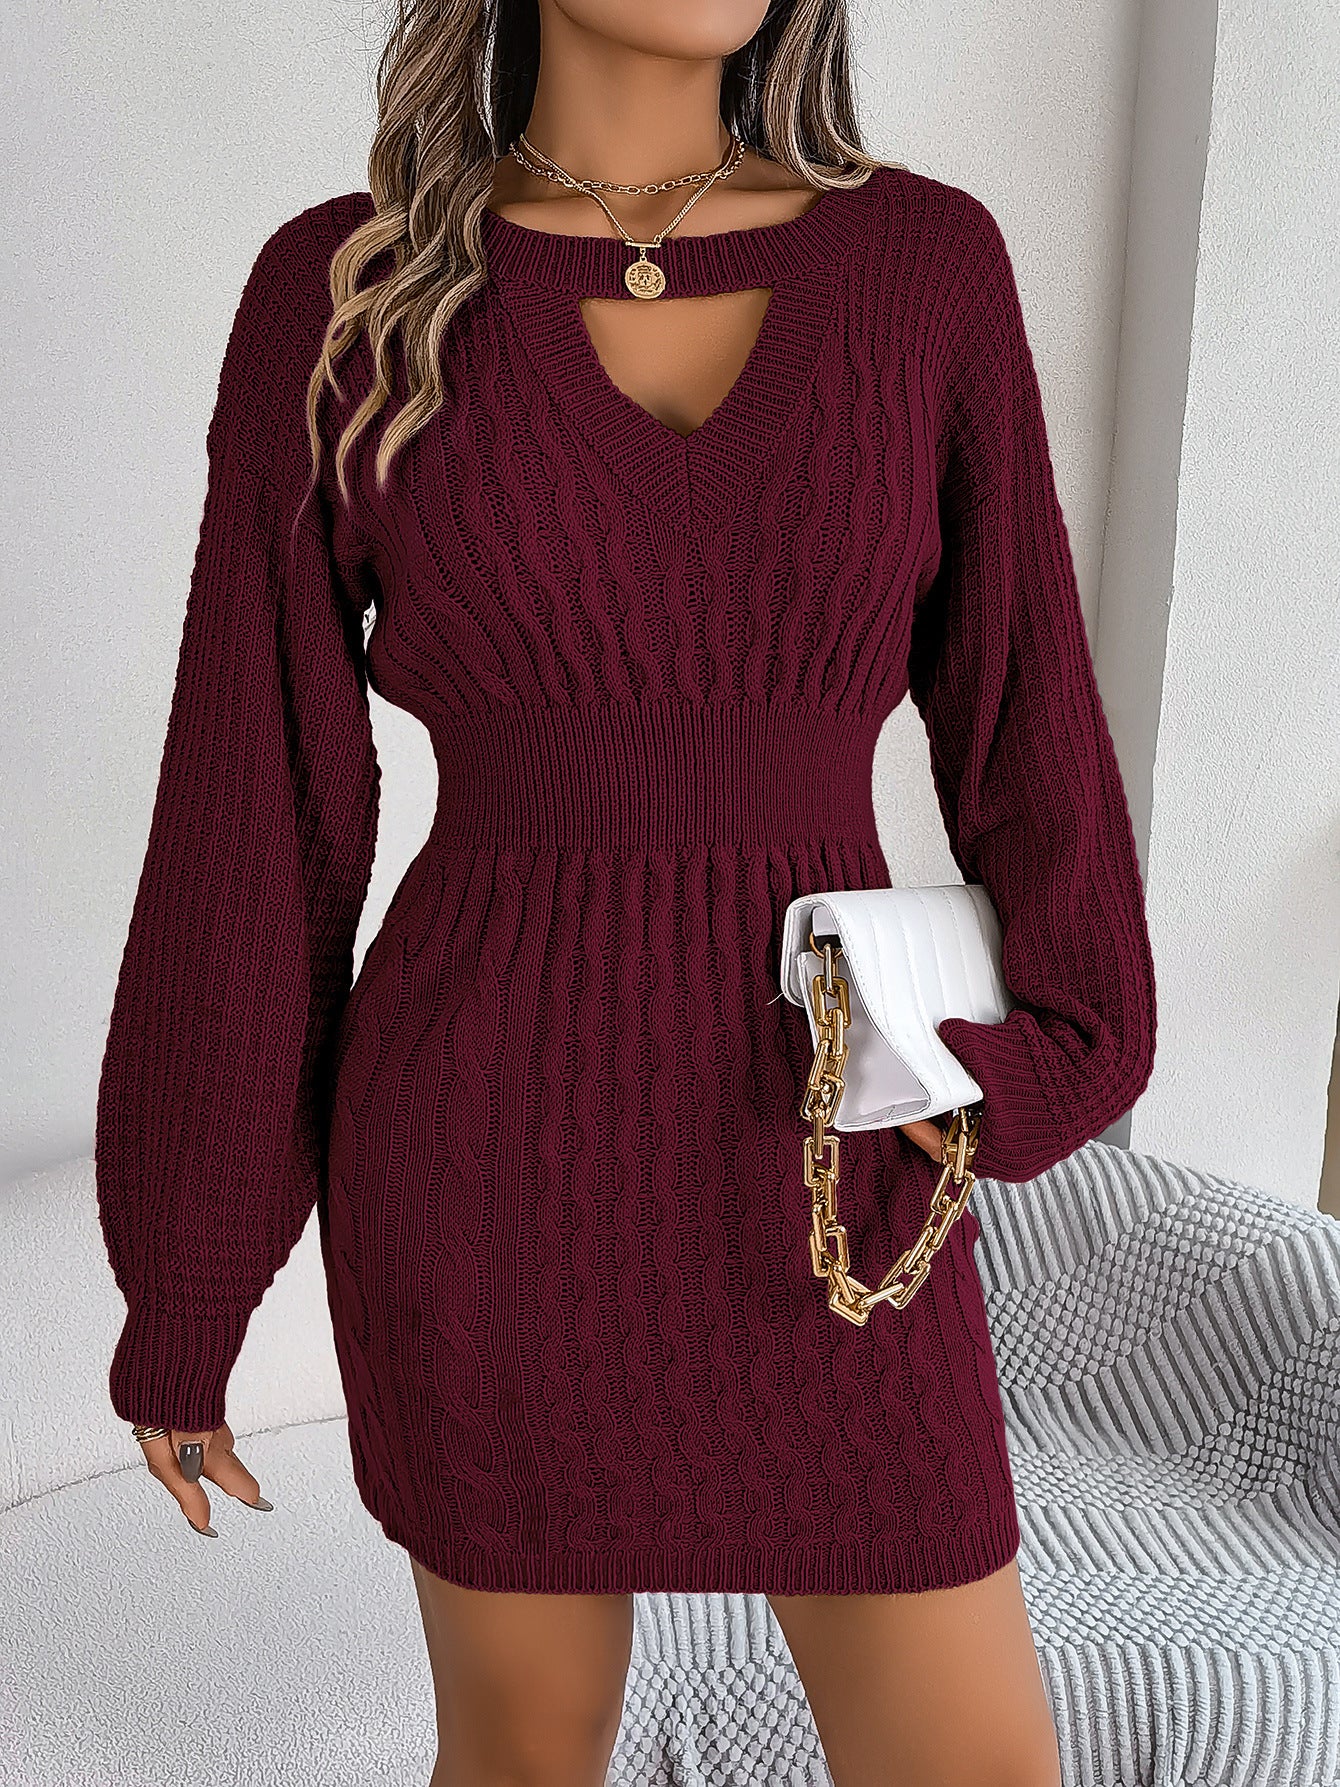 This sophisticated Womens Twist Hollow-out Lantern Sleeve Sweater Dress is crafted from premium, luxurious fabric and features a chic twist on a classic style. Fitted sleeves and a modern lantern hem create an elegant silhouette, while the delicate, intricate hollow-out detailing adds a touch of refinement. Be at the height of fashion with this timeless, effortlessly chic dress.